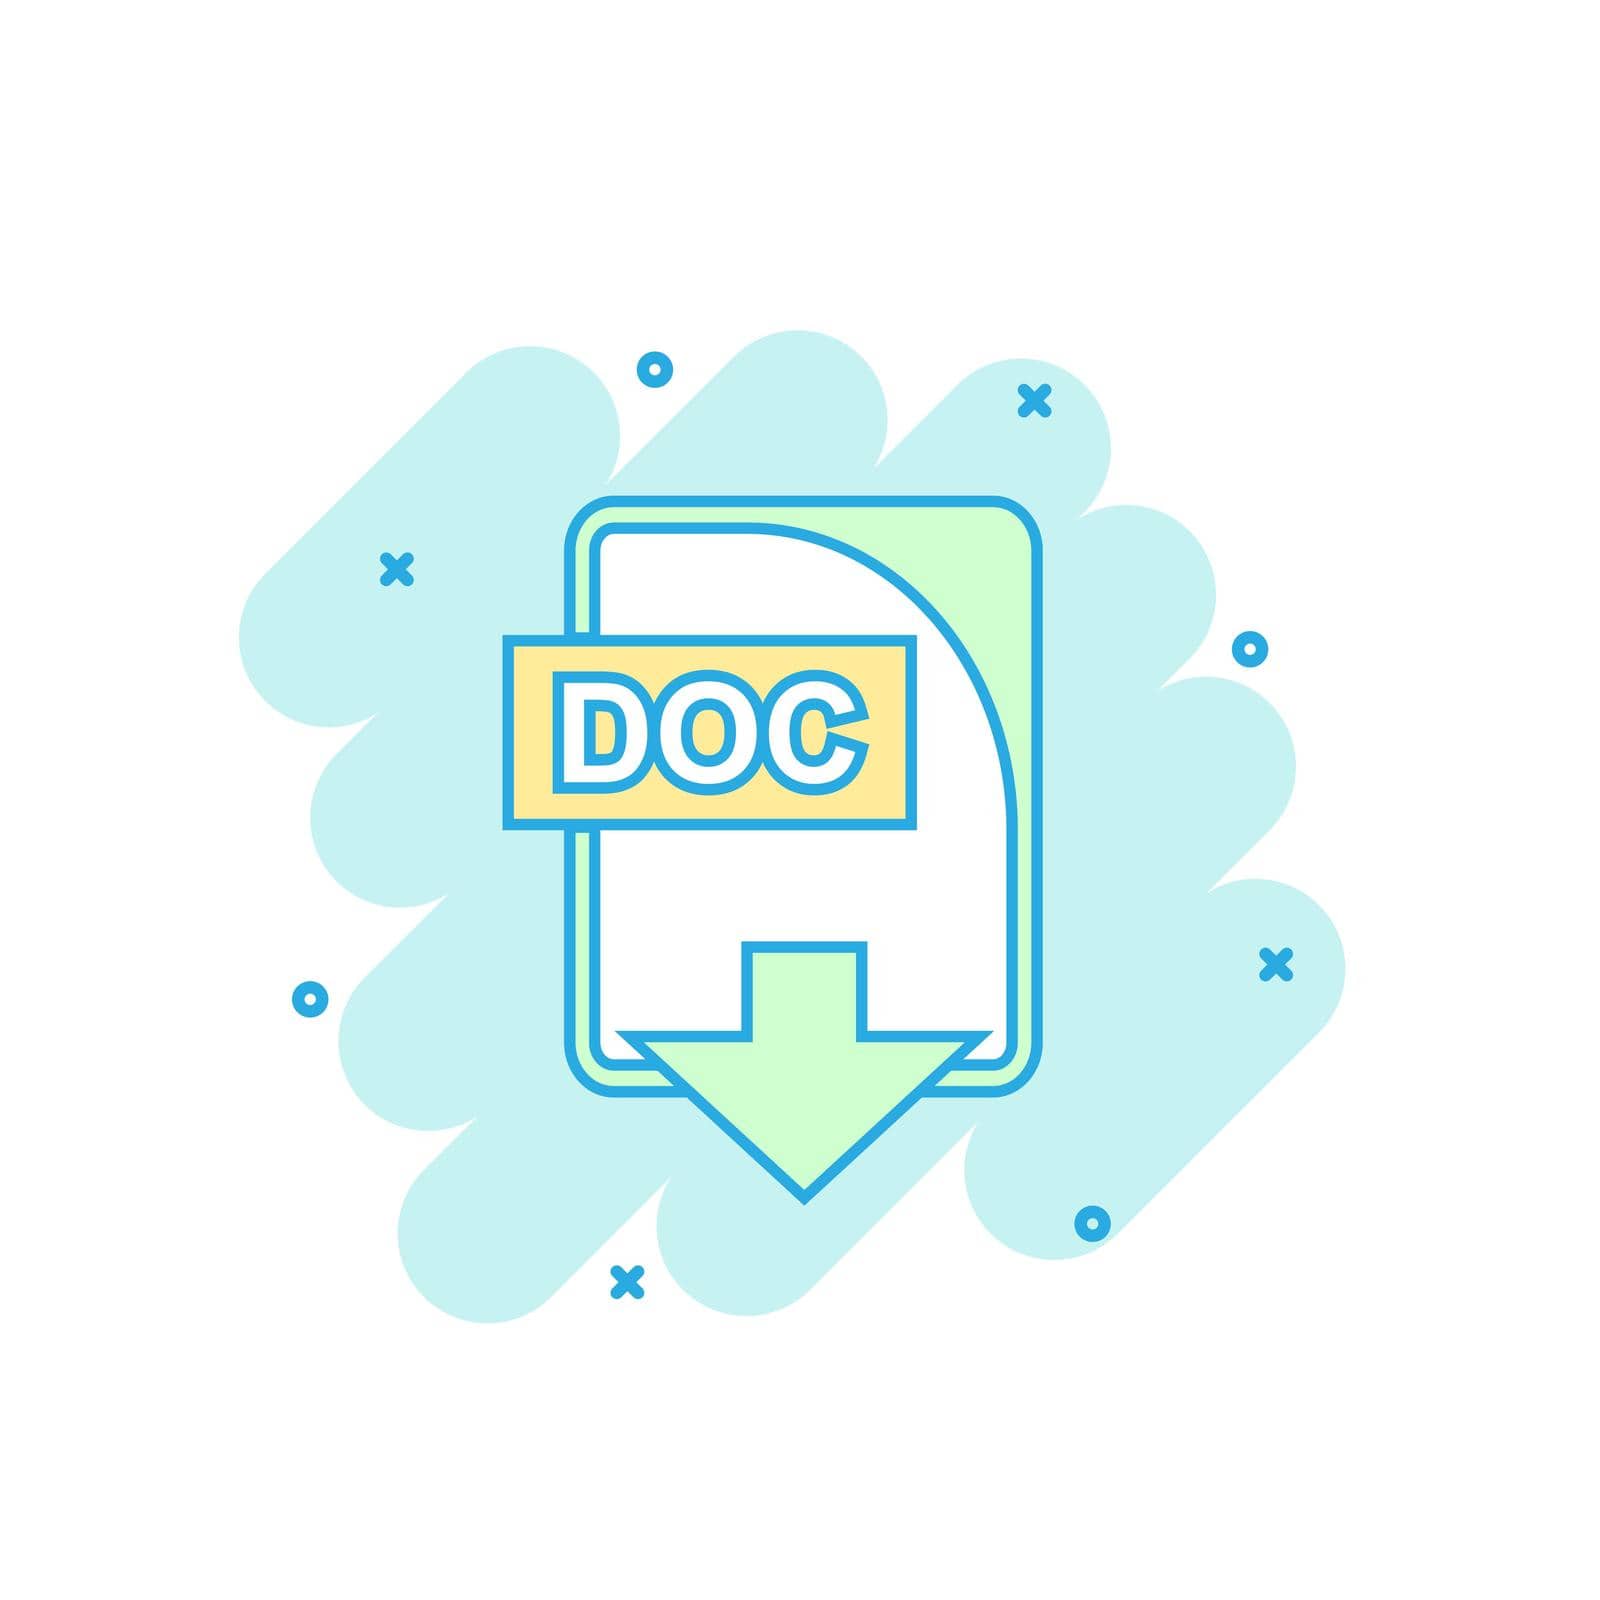 Cartoon colored DOC file icon in comic style. Doc download illustration pictogram. Document splash business concept.